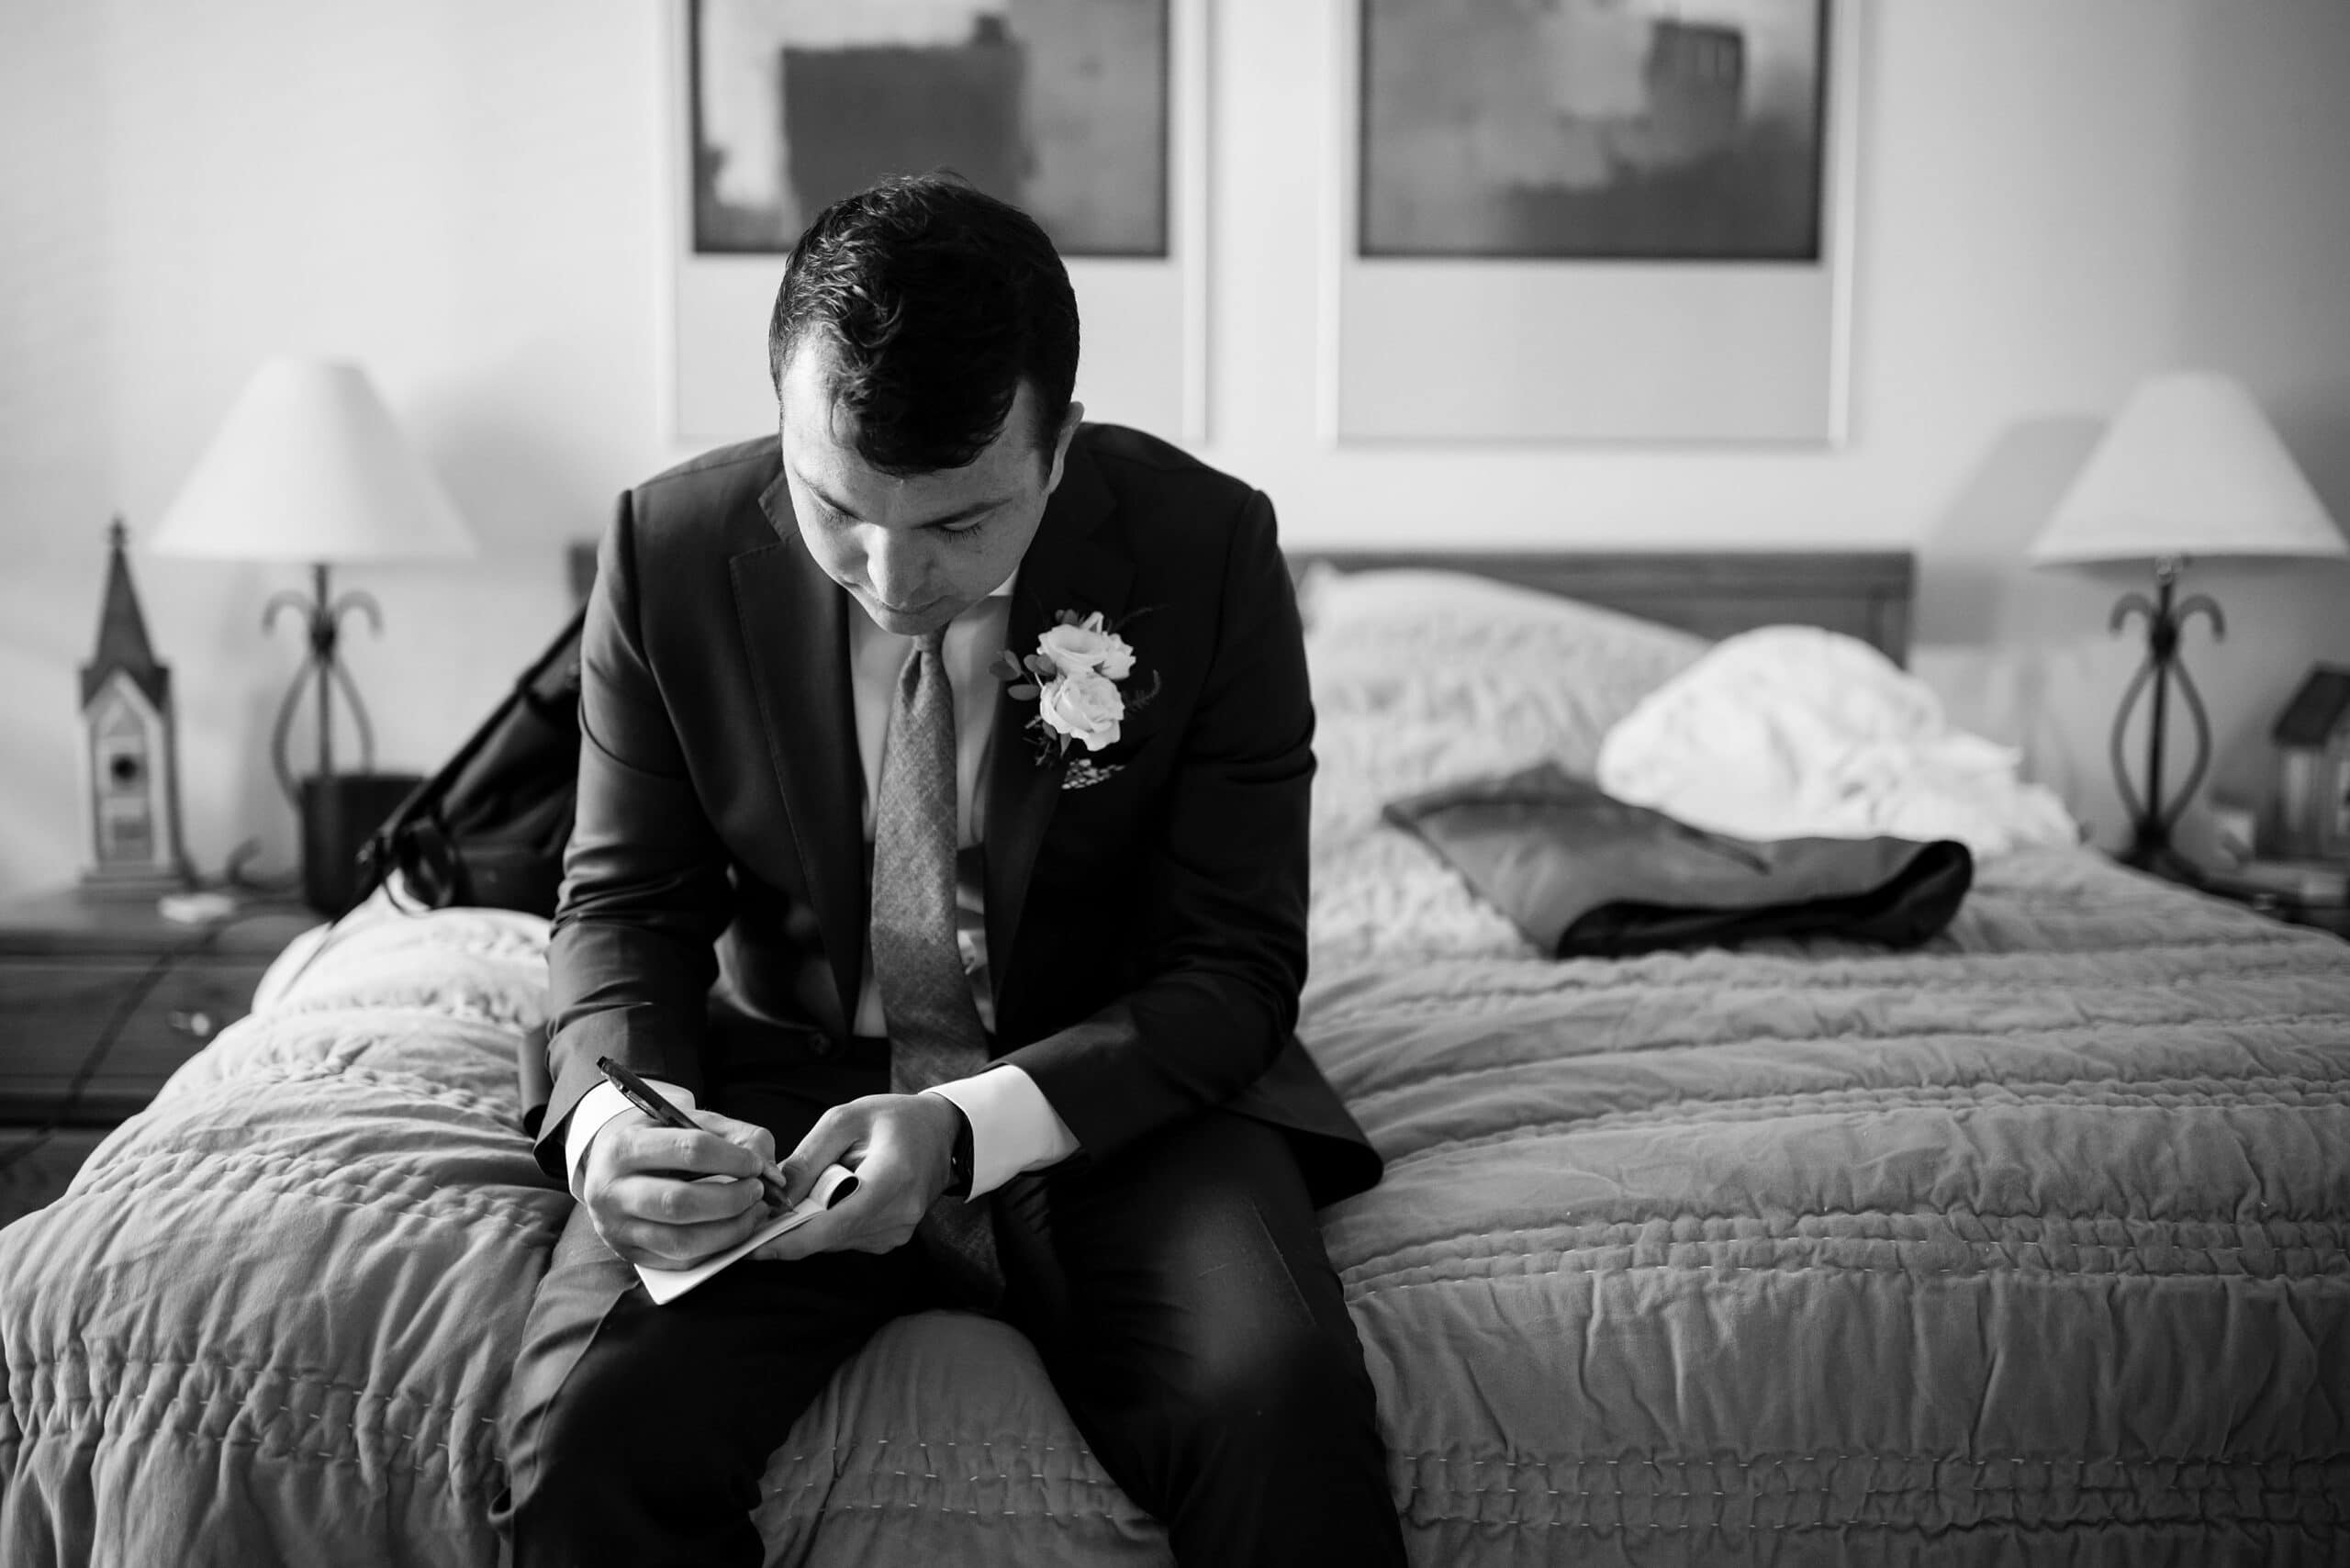 The groom writes his vows on his bed